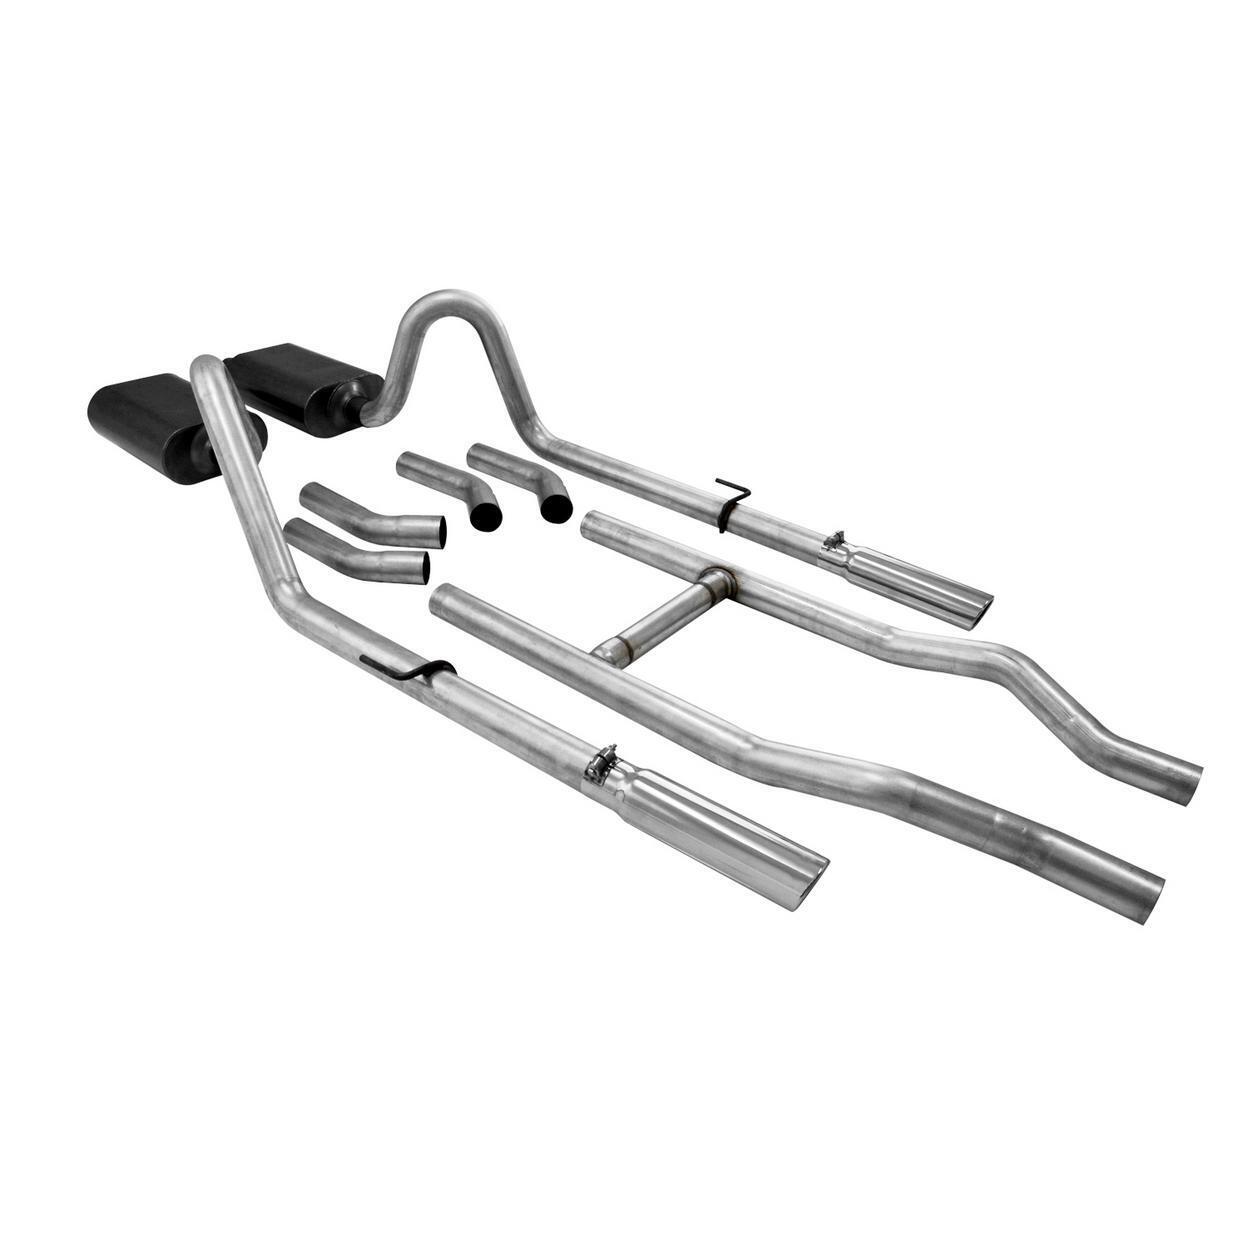 Exhaust System Kit for 1957 Chevrolet Two-Ten Series 4.6L V8 GAS OHV